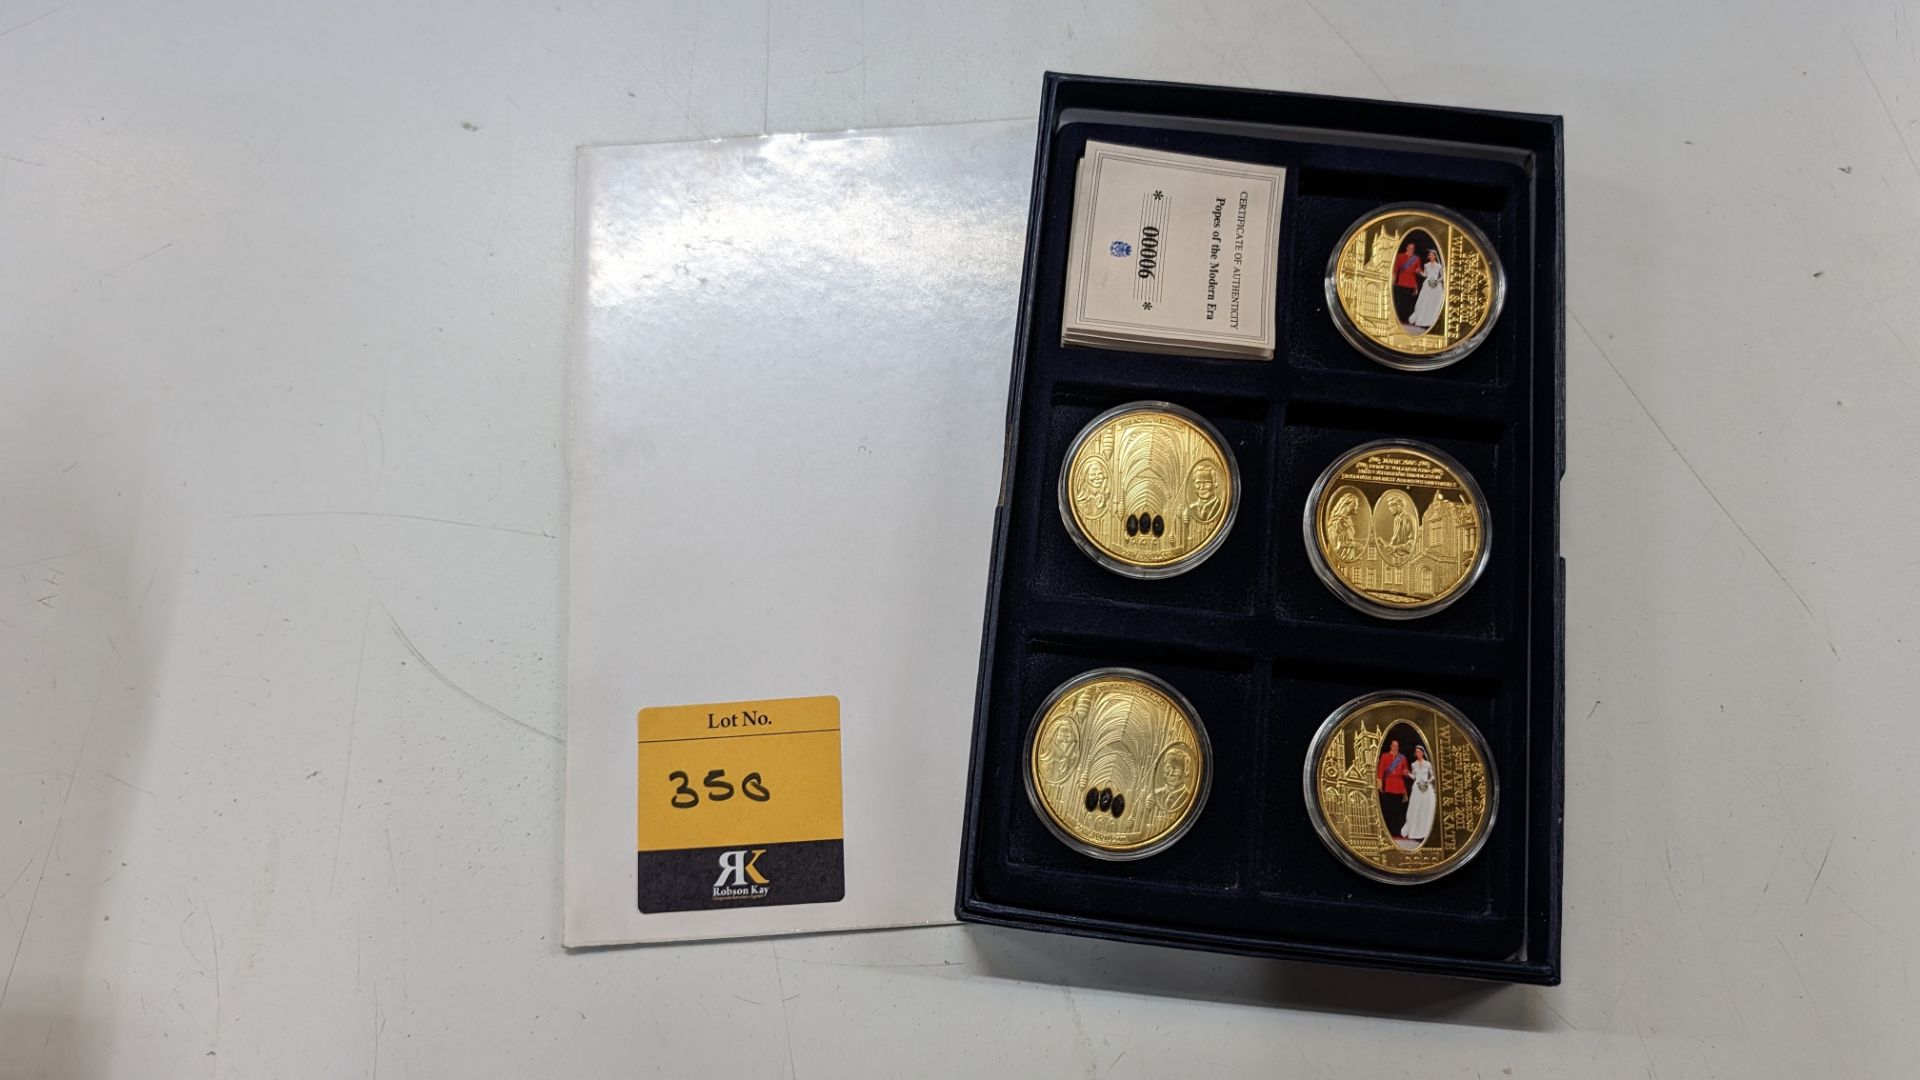 5 off assorted decorative coins as pictured including presentation box